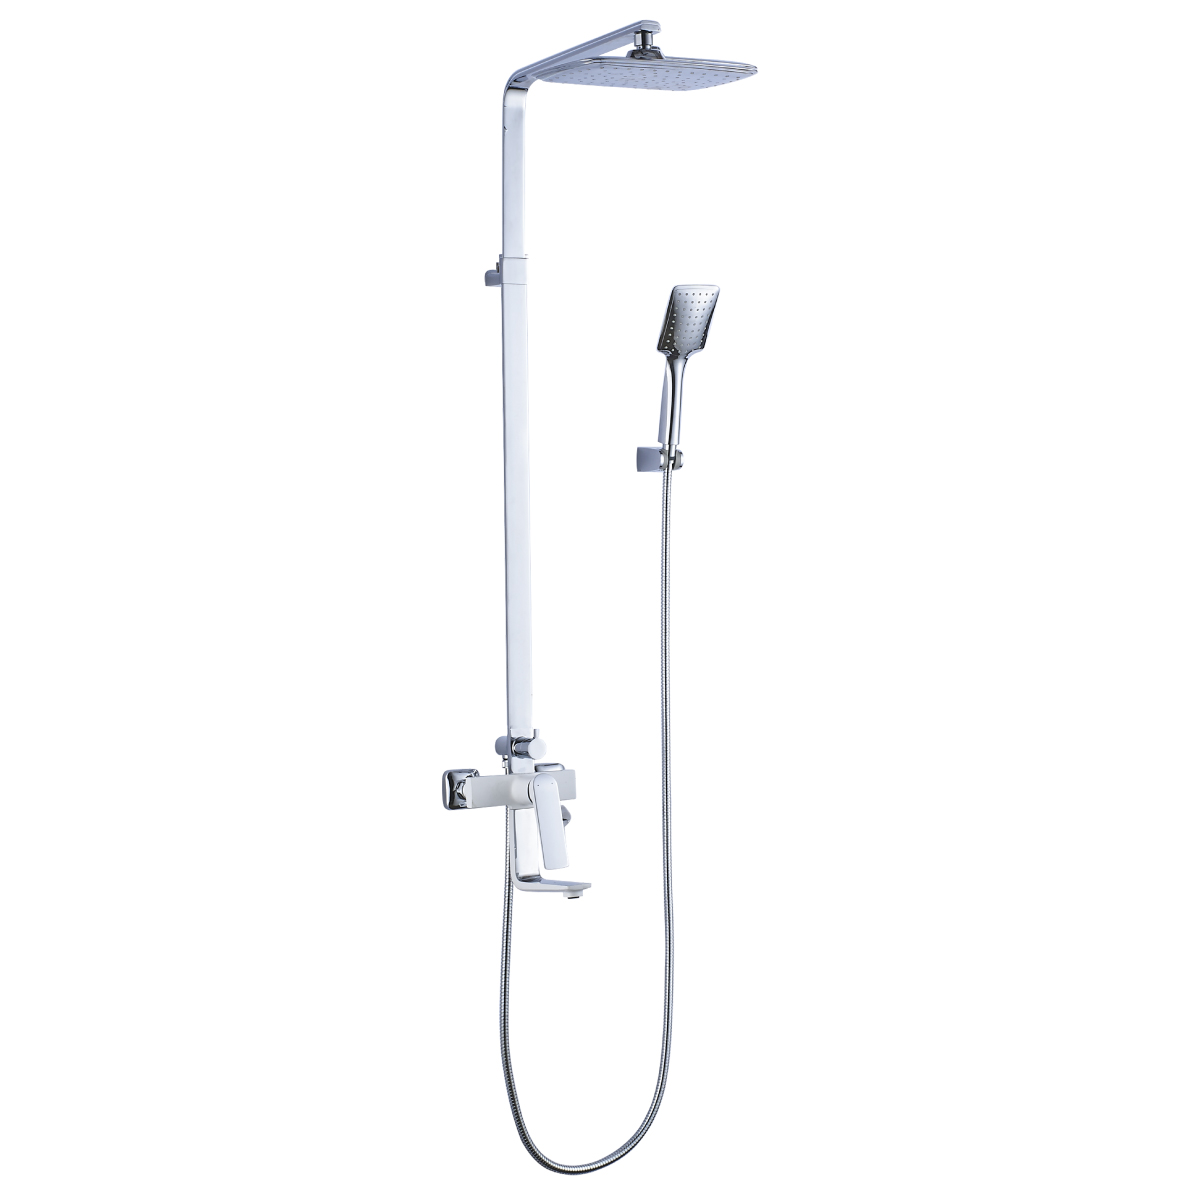 LM5962CW Bath and shower faucet with adjustable rod height, swivel spout and «Tropical rain» shower head